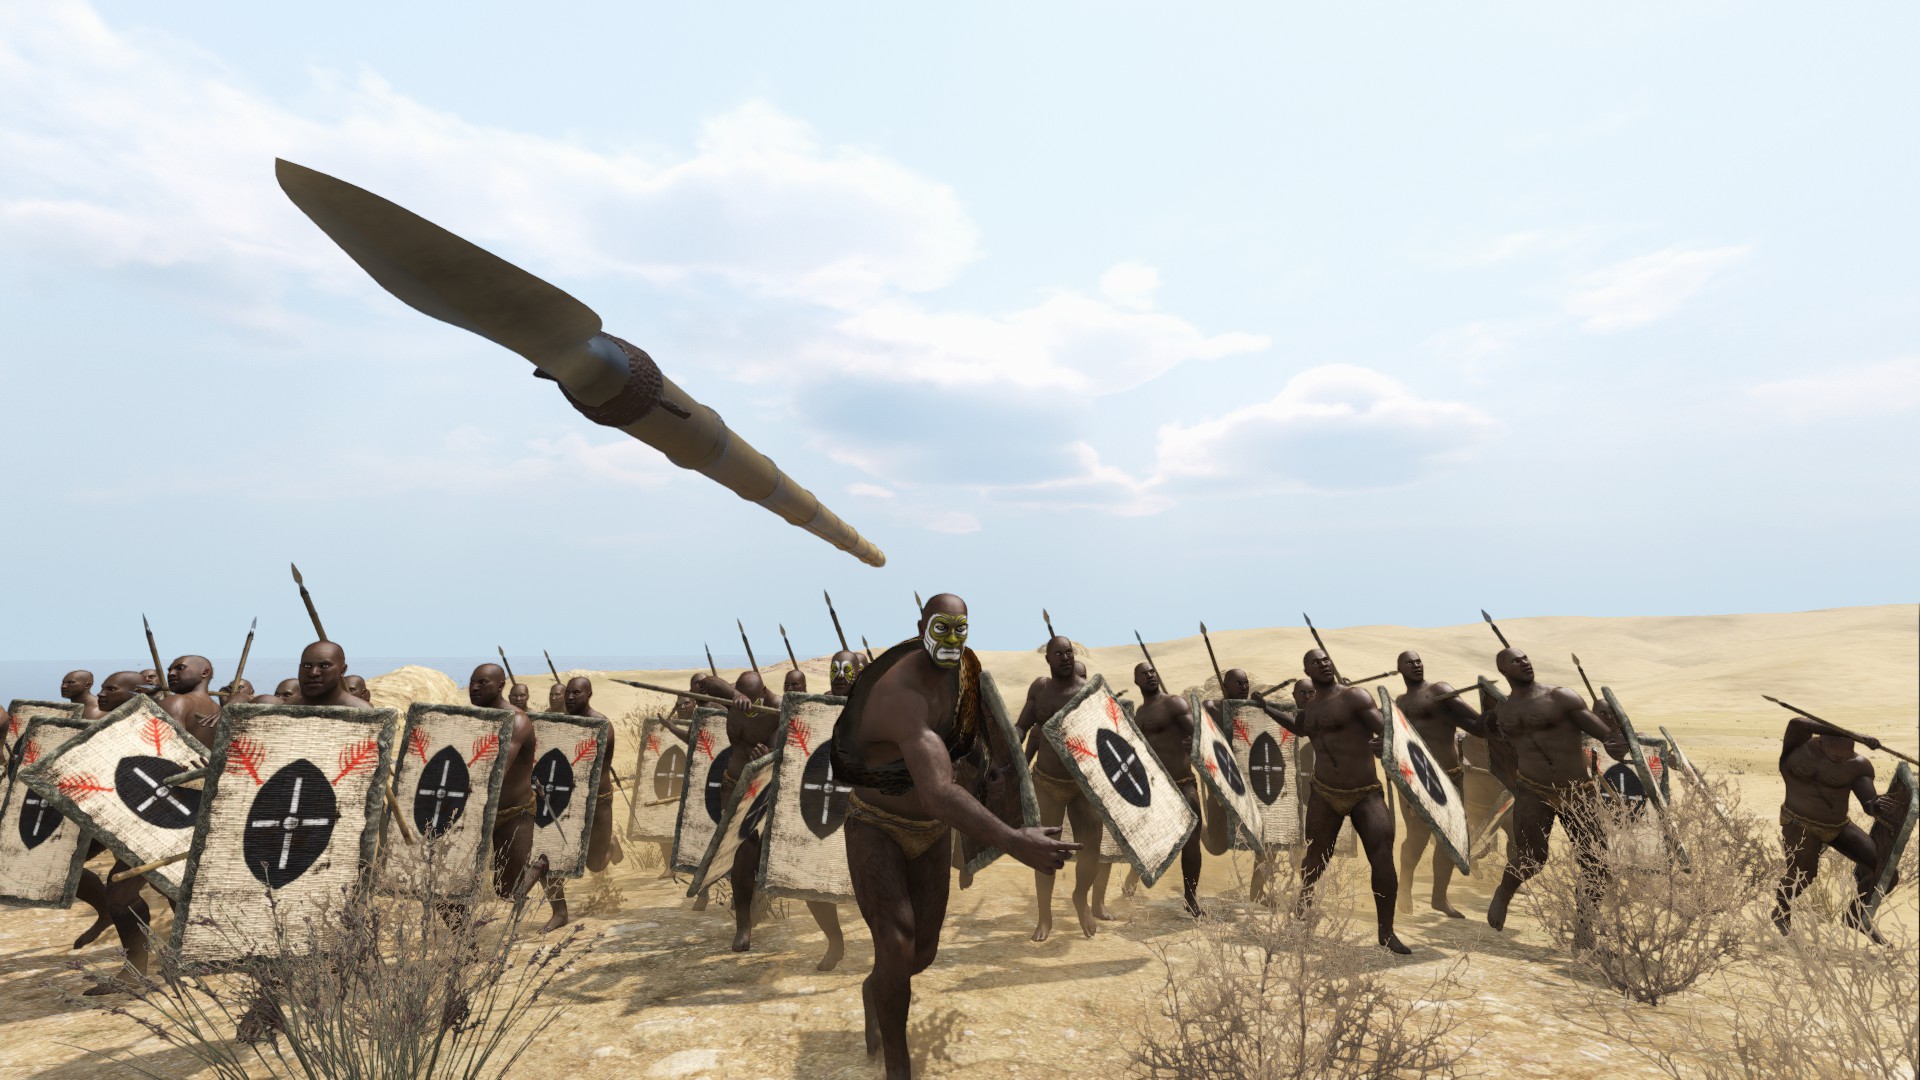 Mount and blade bannerlord караваны. Mount and Blade 2. Mount and Blade 2 Bannerlord. Mount & Blade 2: Bannerlord 2020. Mount & Blade II: Bannerlord Art.